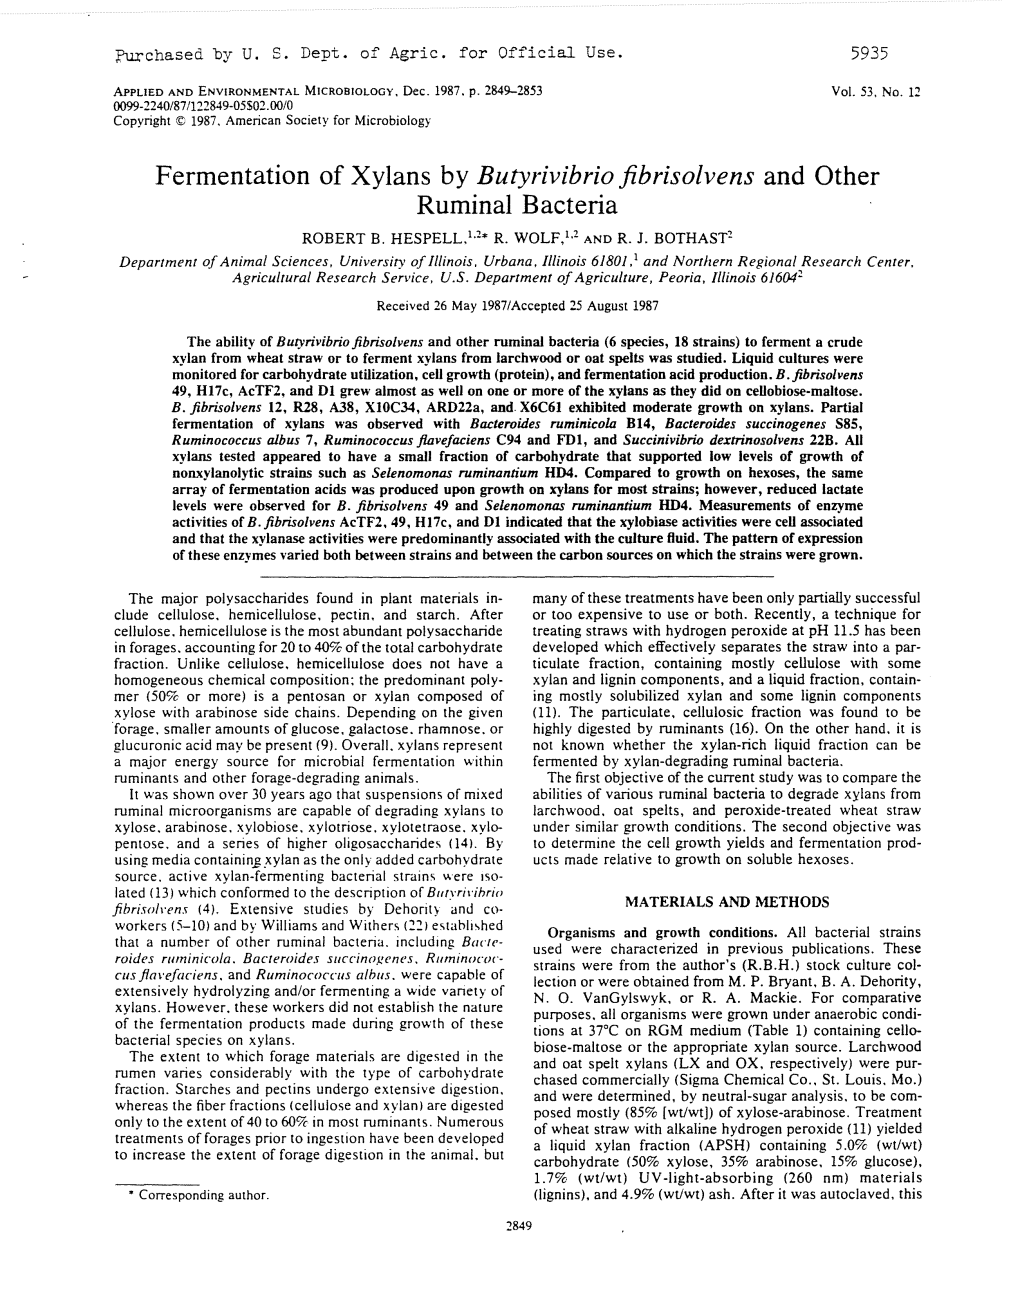 Fermentation of Xylans by Butyrivibrio Fibrisolvens and Other Ruminal Bacteria